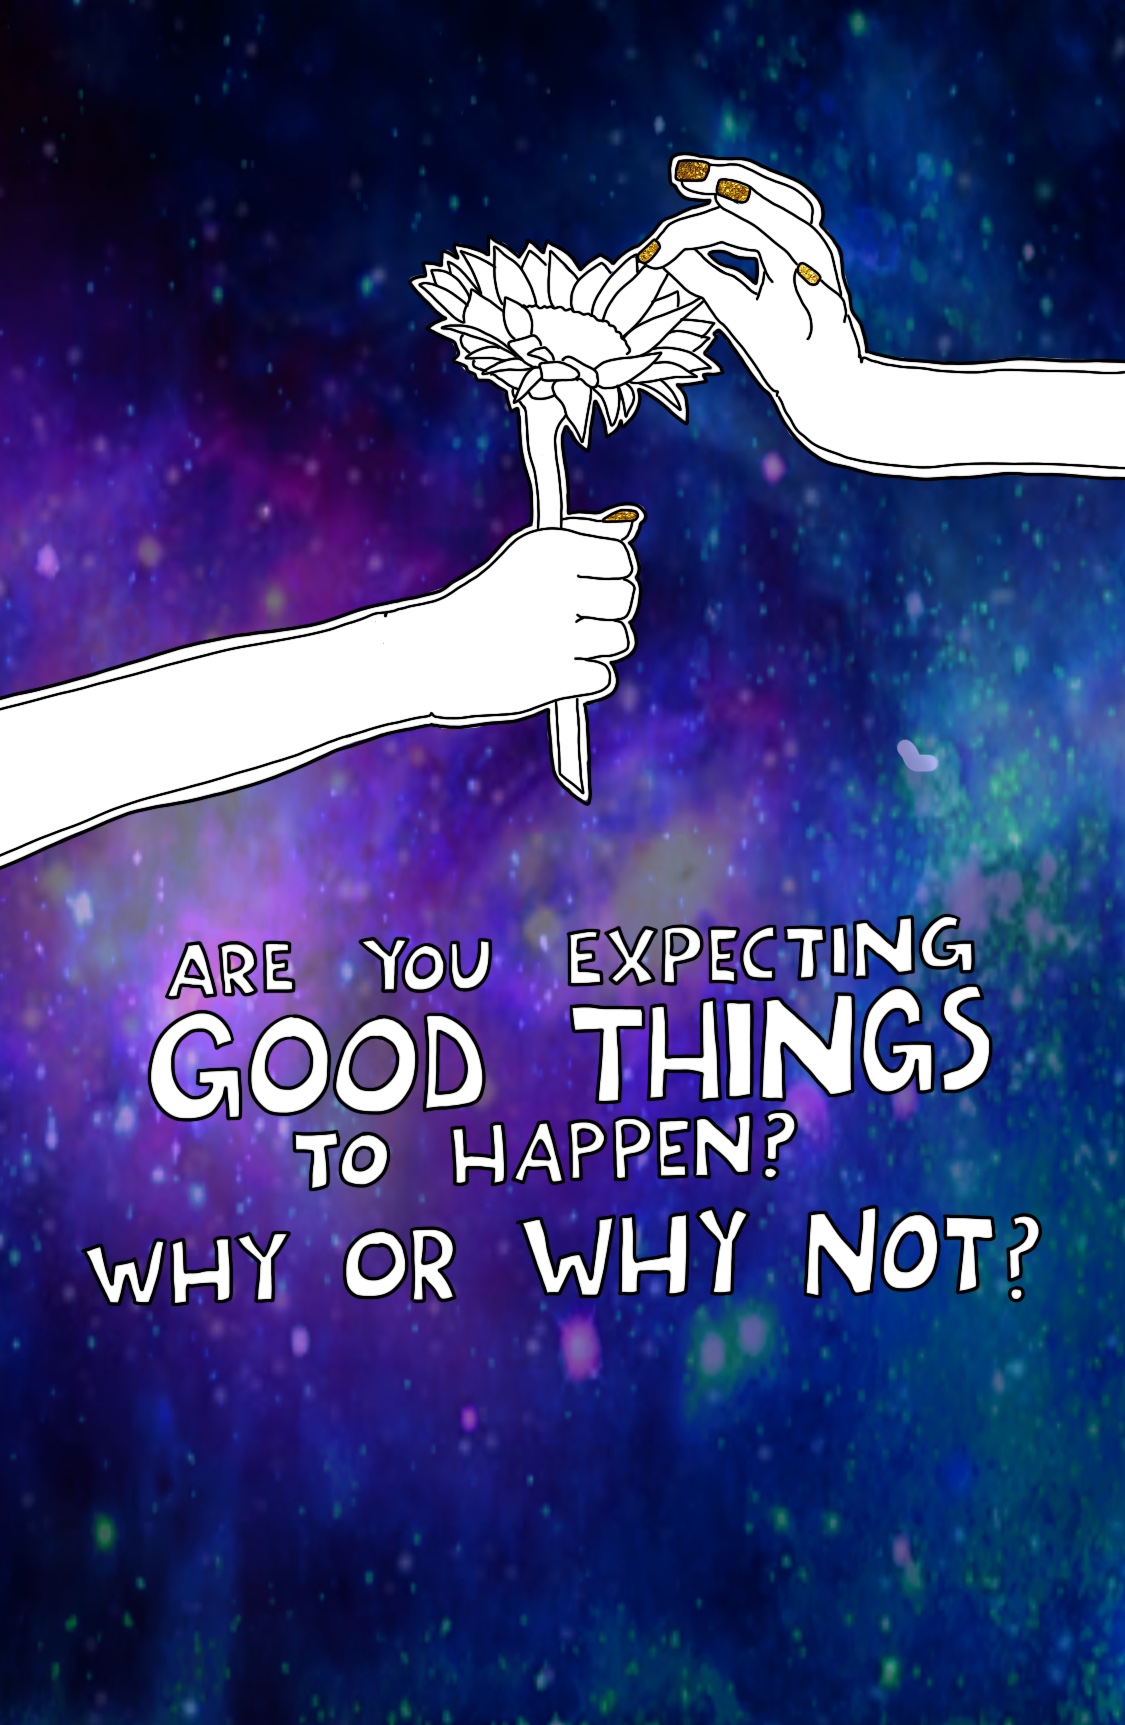 Journal Prompt: Are you expecting good things to happen?